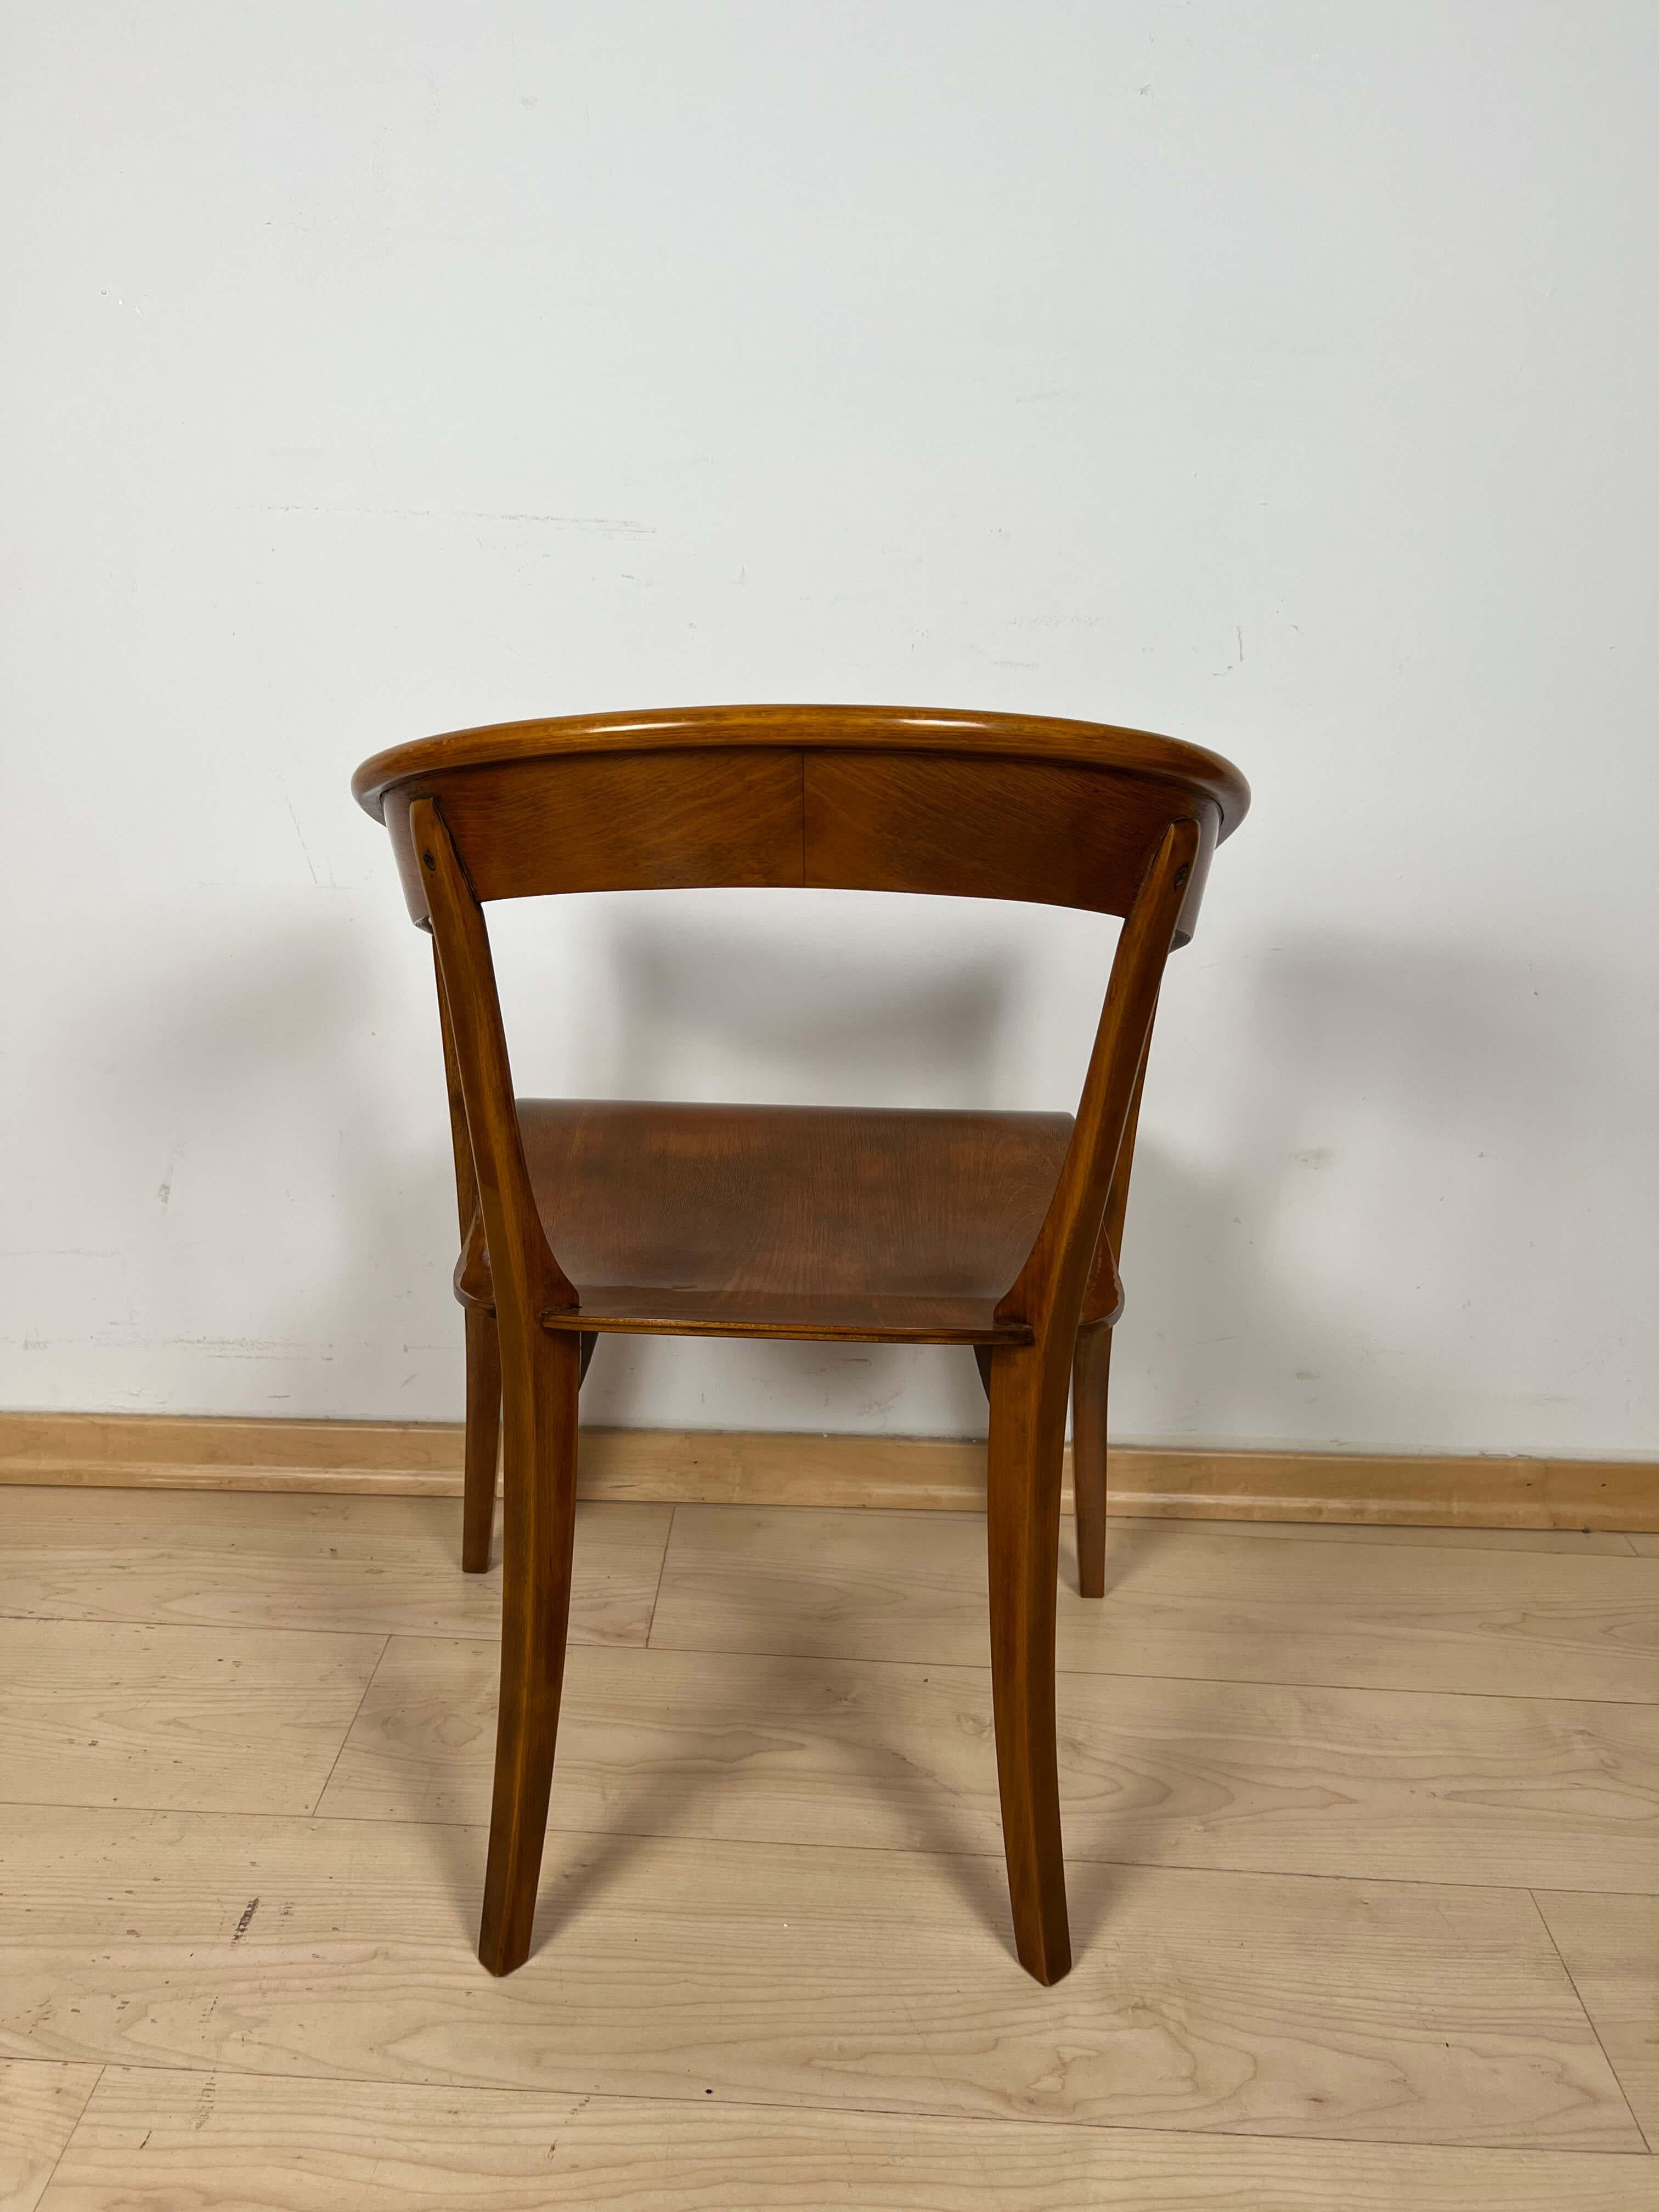 Bauhaus Armchair by Rockhausen, Polished Wood, Germany, 1928 For Sale 1